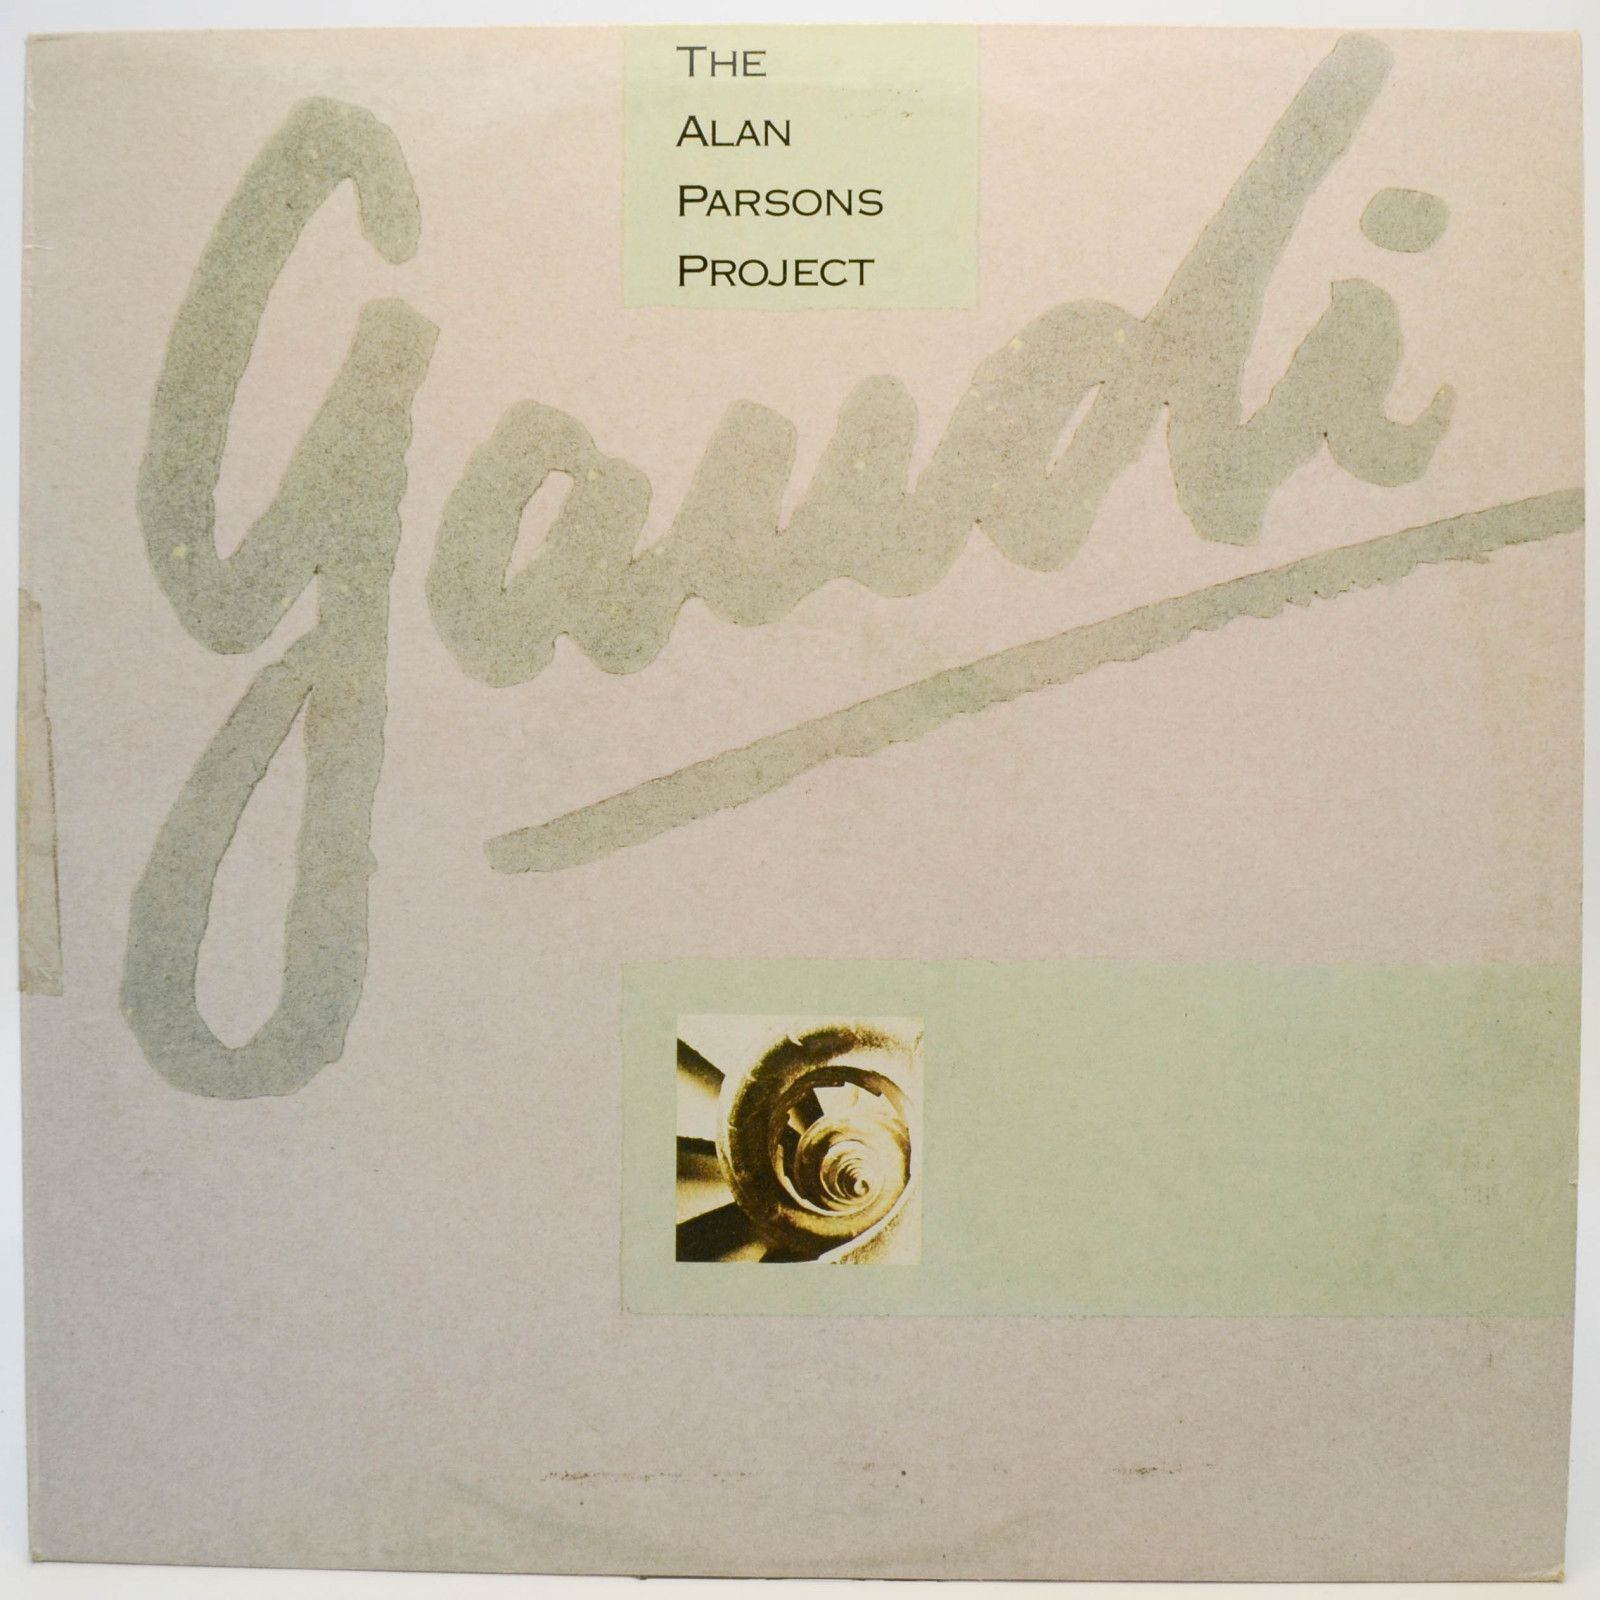 The Alan Parsons Project — Gaudi, 1987